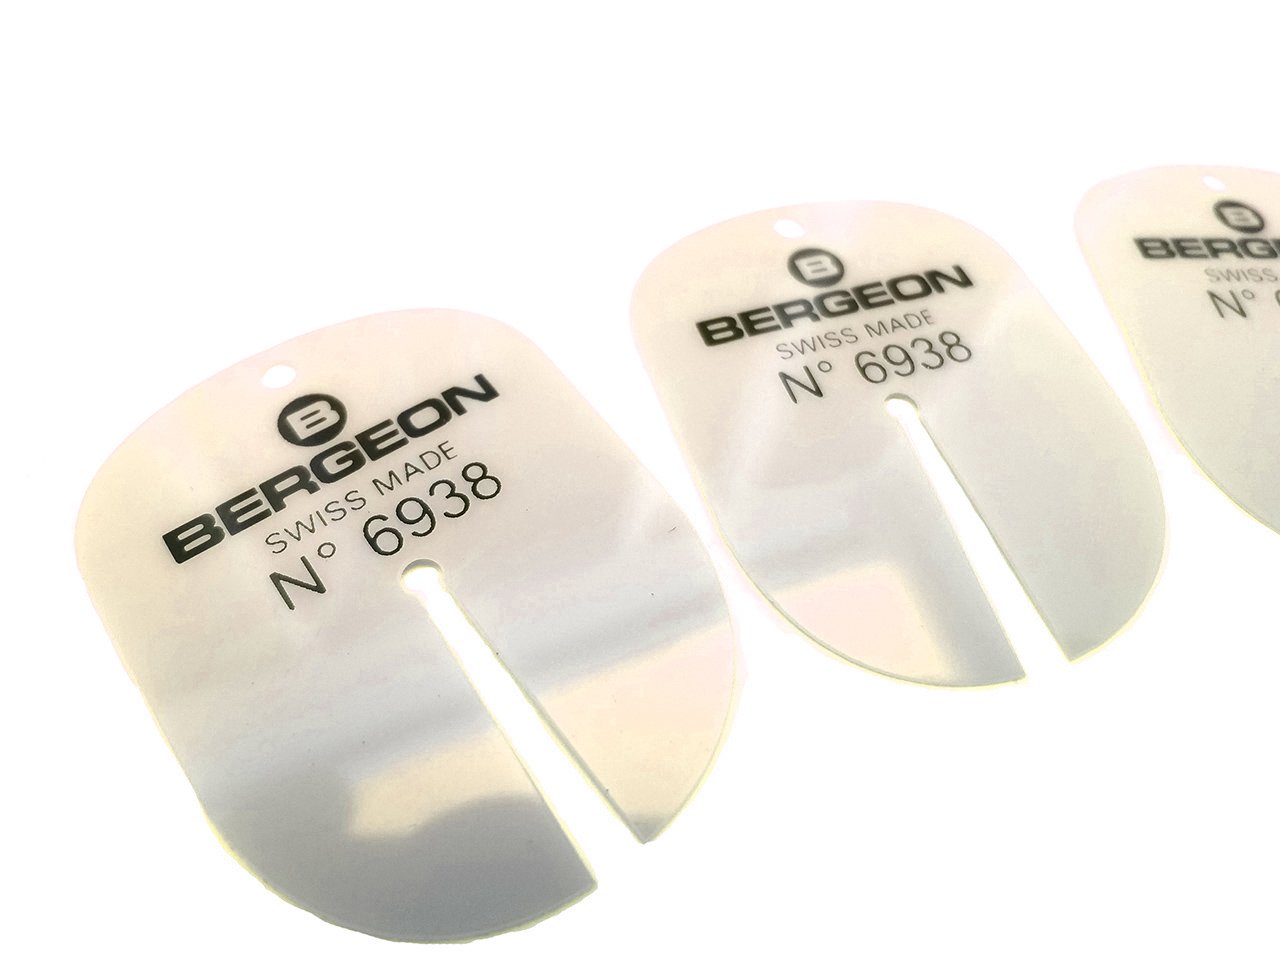 Bergeon Dial Protecting Plastic Sheets Set of 3 Swiss Made No. 6938